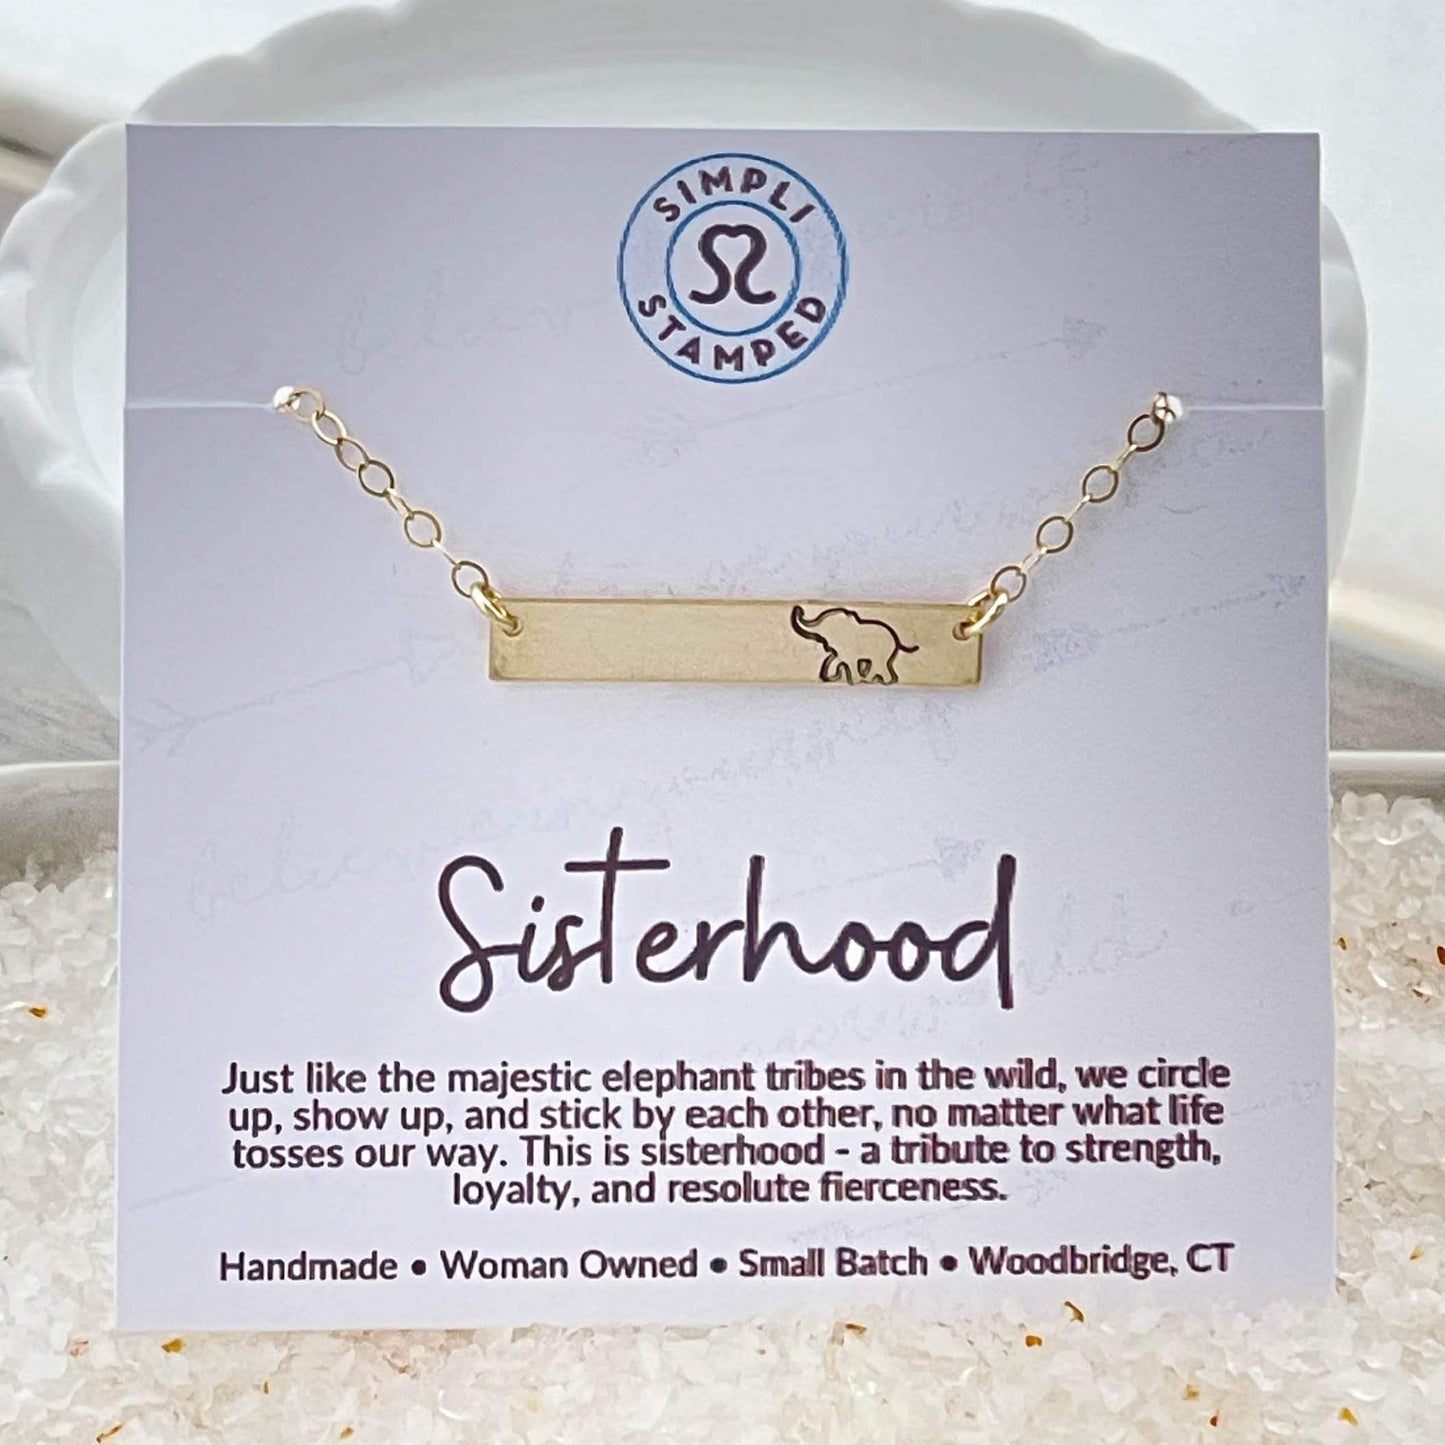 Gold bar necklace with elephant stmaped on it on card describing sisterhood